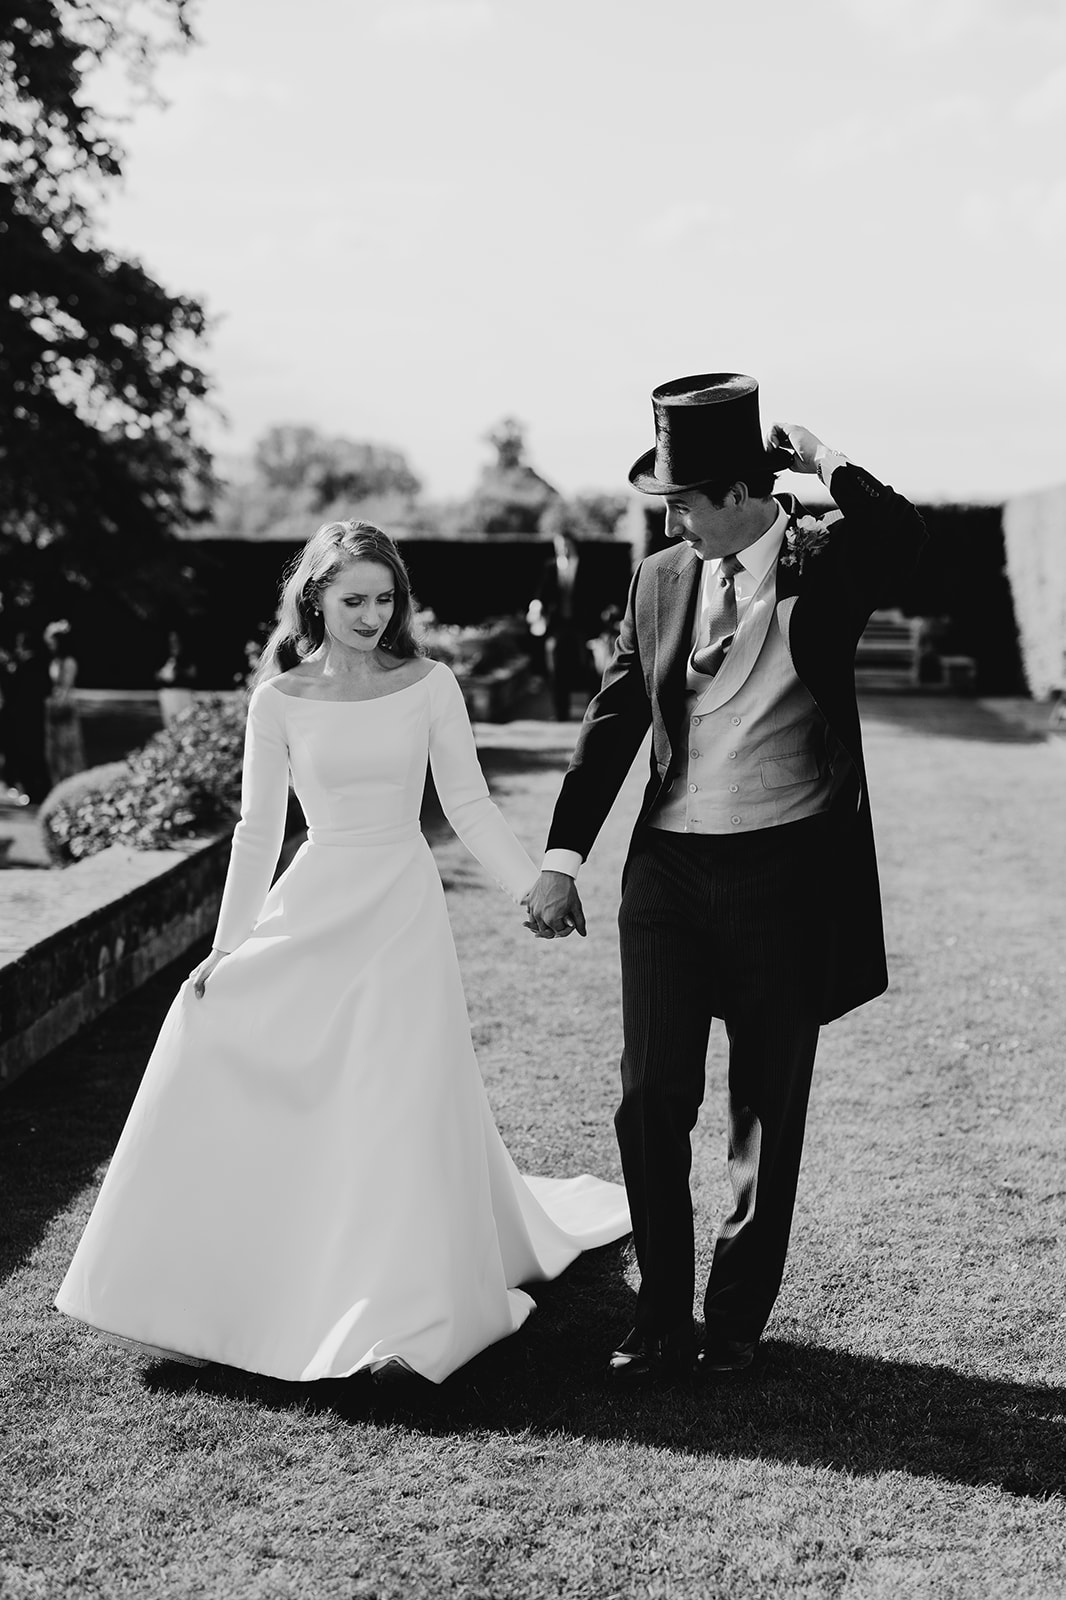 Wedding photography at Buckhurst park wedding as bride and groom walk though grounds